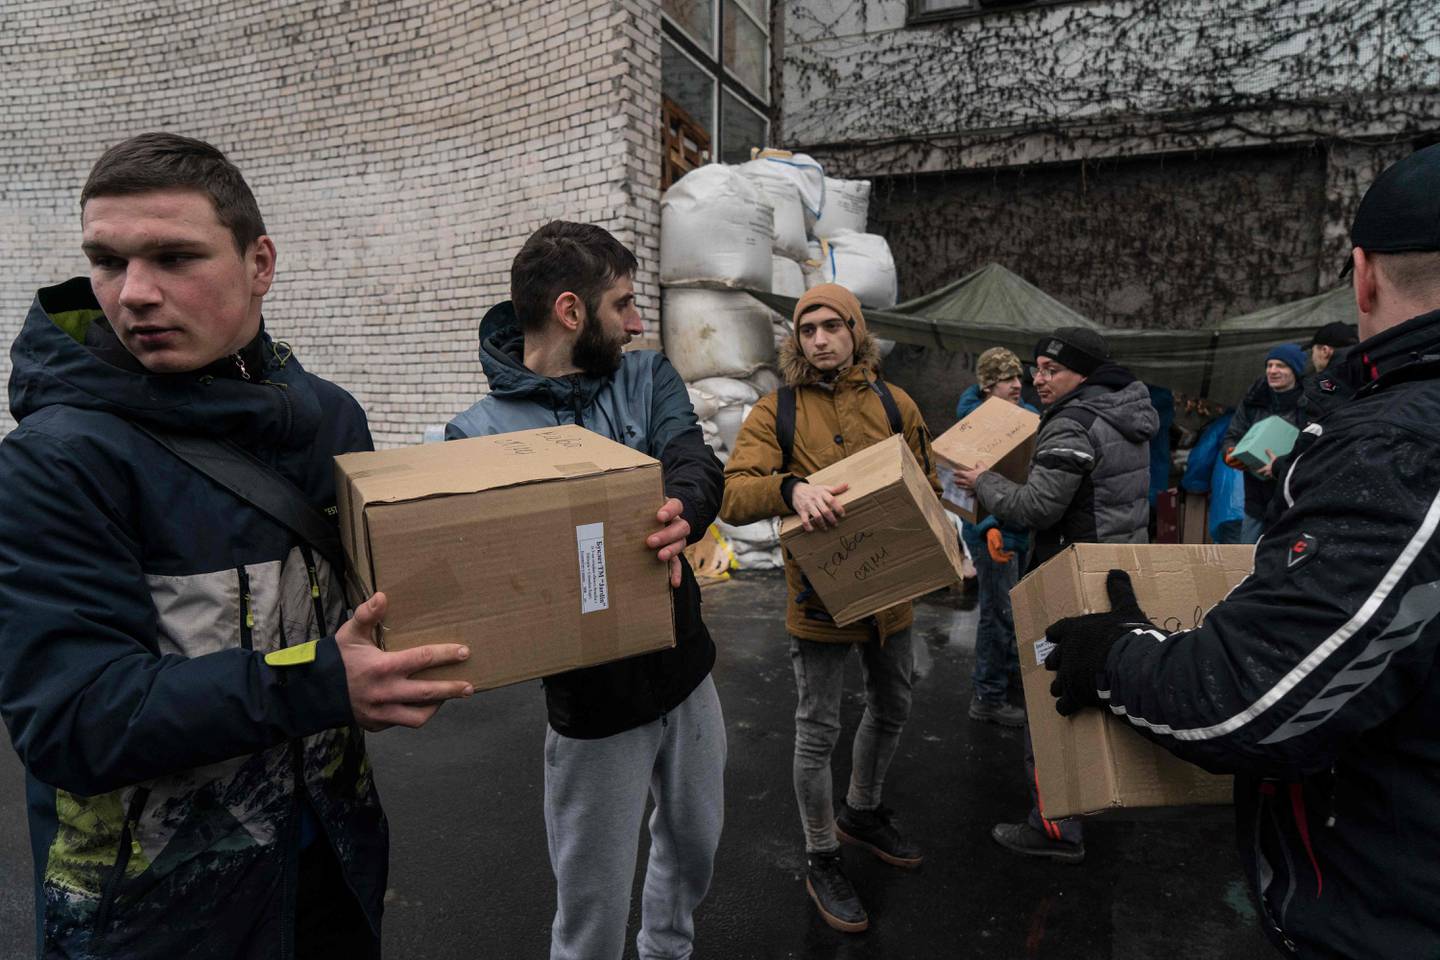 Volunteers unload boxes received from across the country at a charitable fund centre set up to oversee the distribution of humanitarian supplies to those in need, servicemen and the displaced in the Ukrainian city of Dnipro. AFP